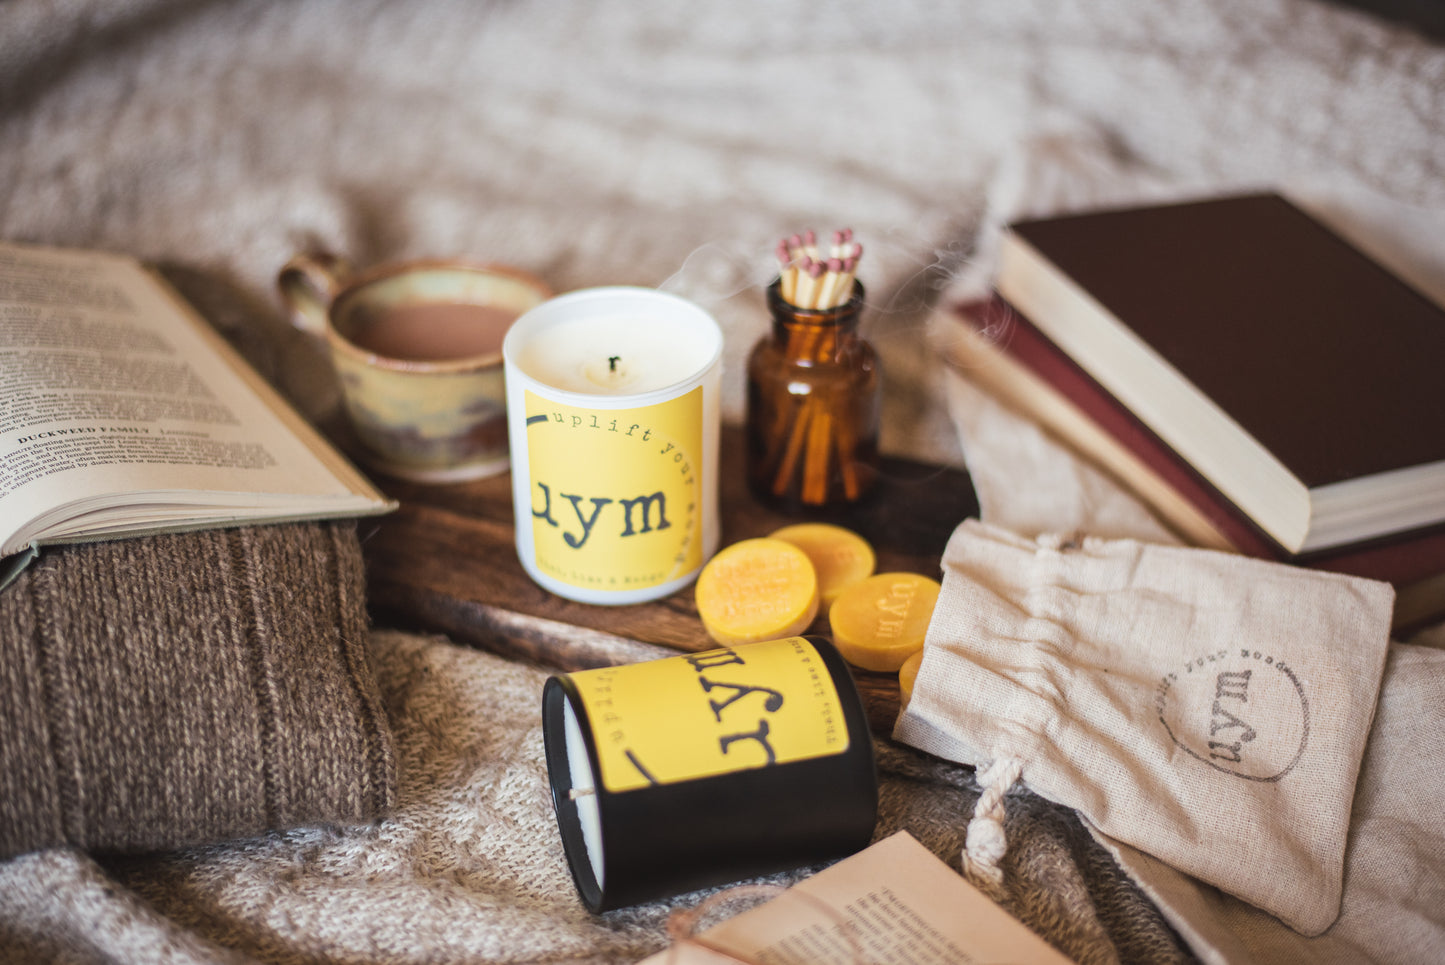 Thai Lime and Mango natural wax candle,matt black candle, matt white glass jar candle unlighted, natural wax melts yellow in a cotton bag, books and a nice cup of tea, cosy atmosphere, Uplift Your Mood Scents